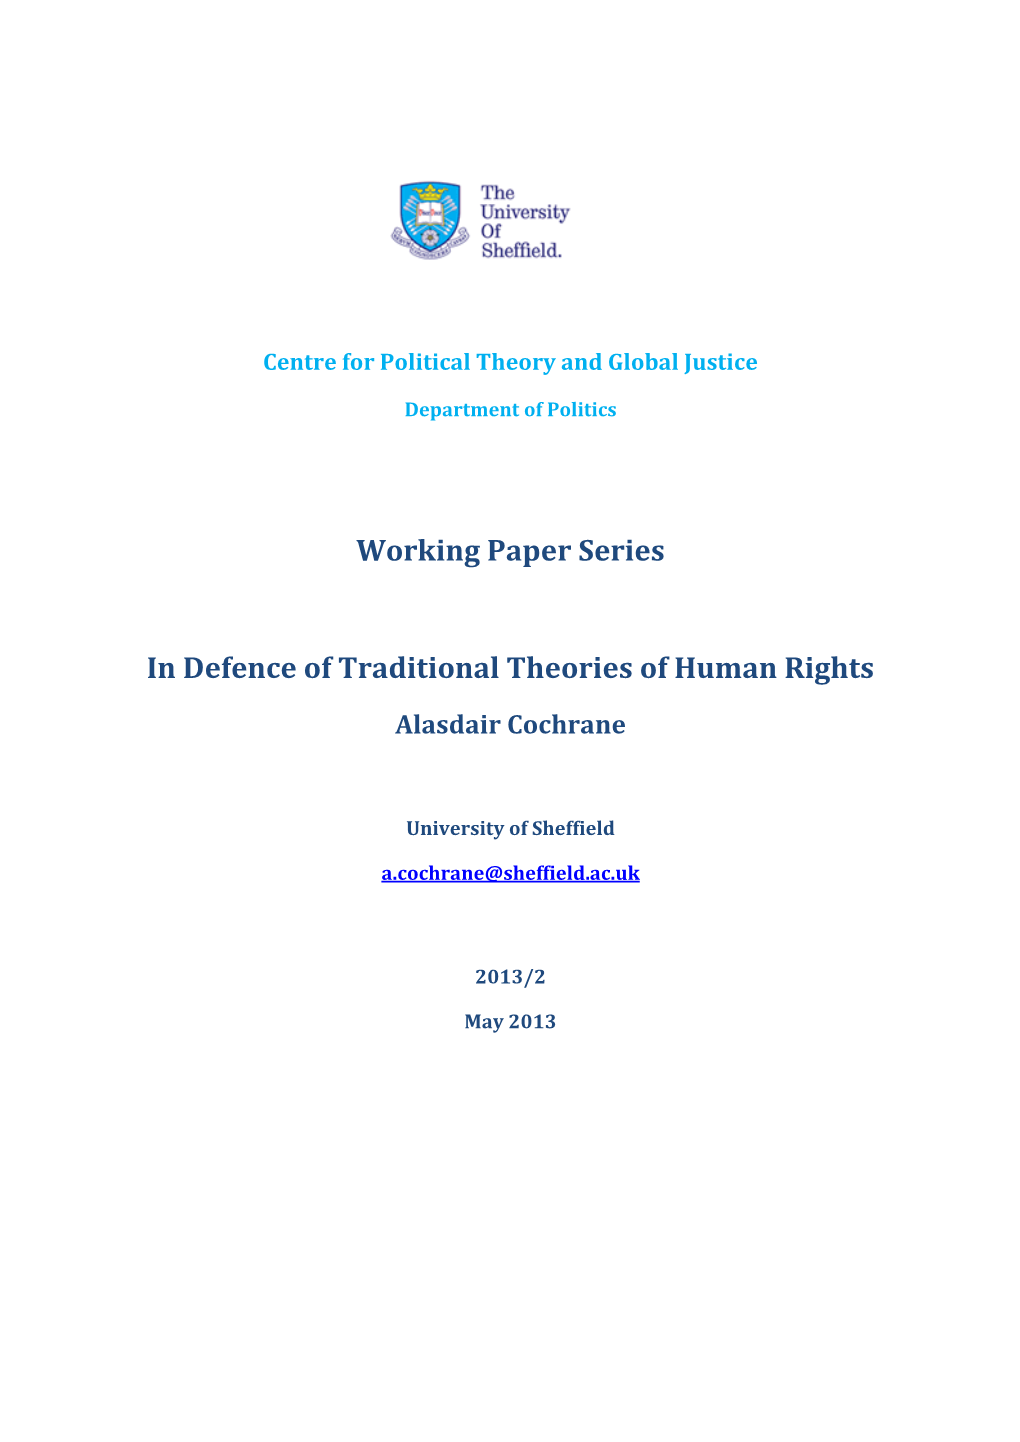 Working Paper Series in Defence of Traditional Theories of Human Rights